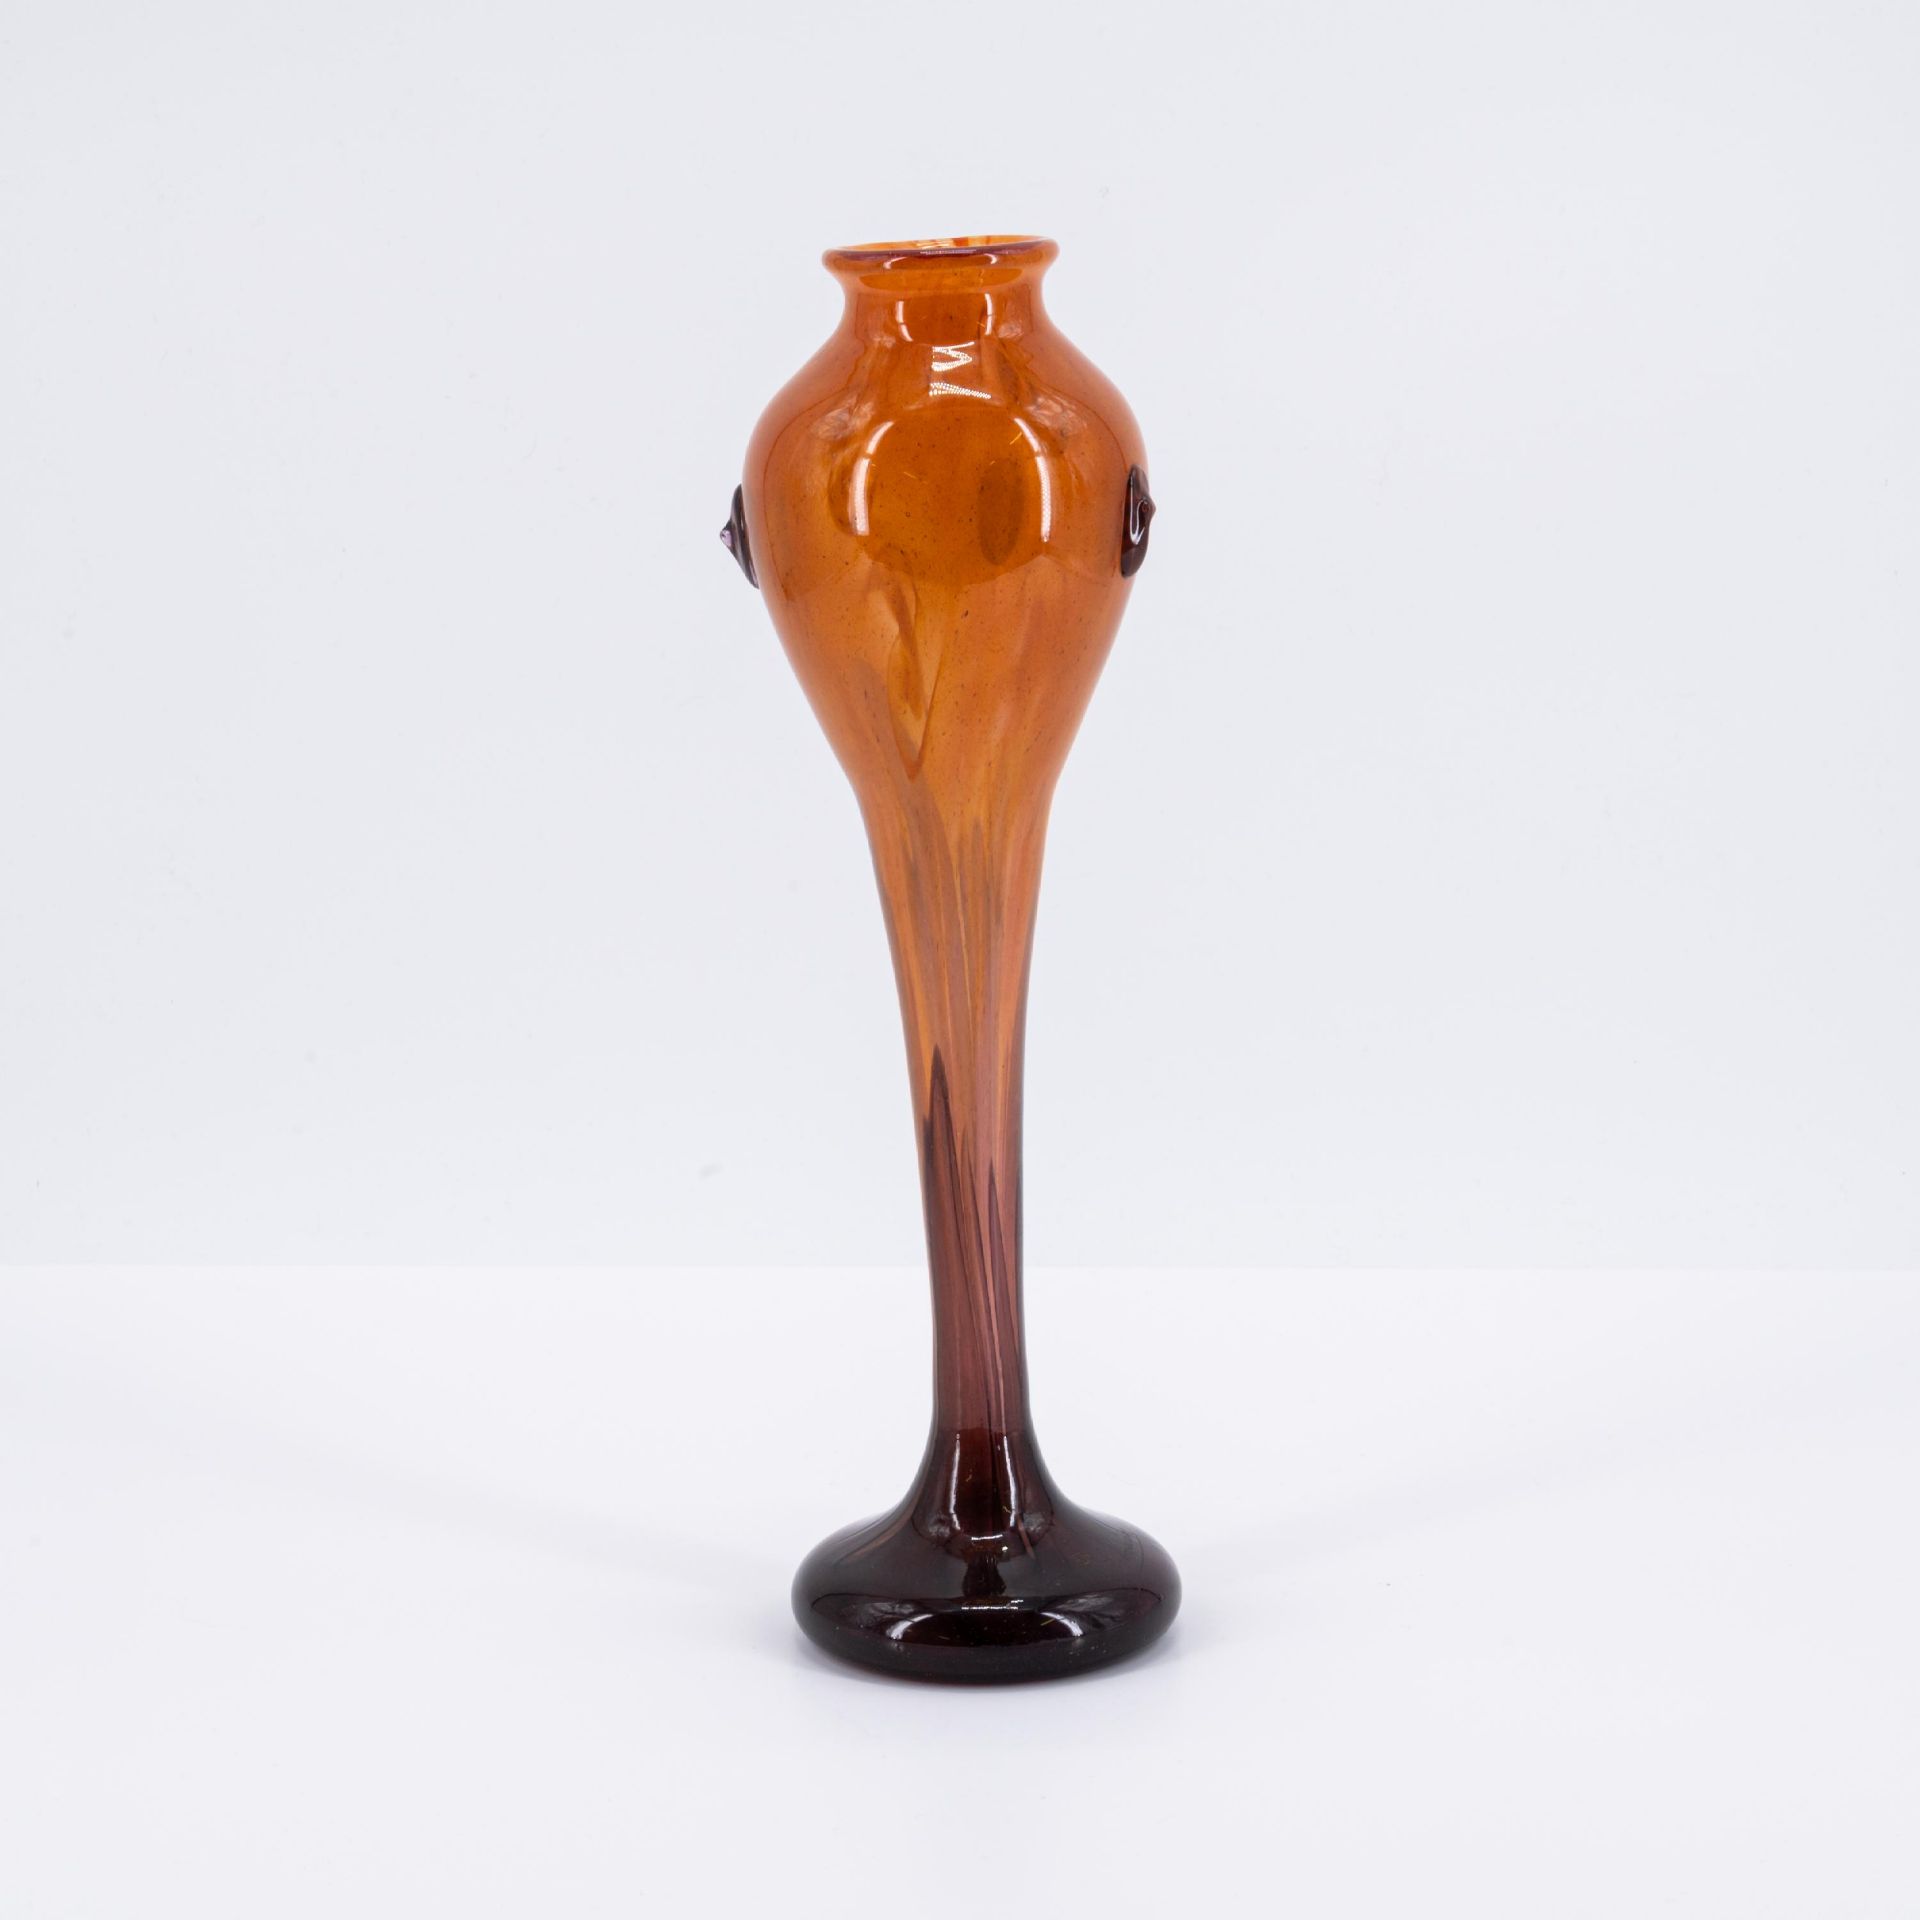 Slim baluster vase with studs - Image 3 of 7